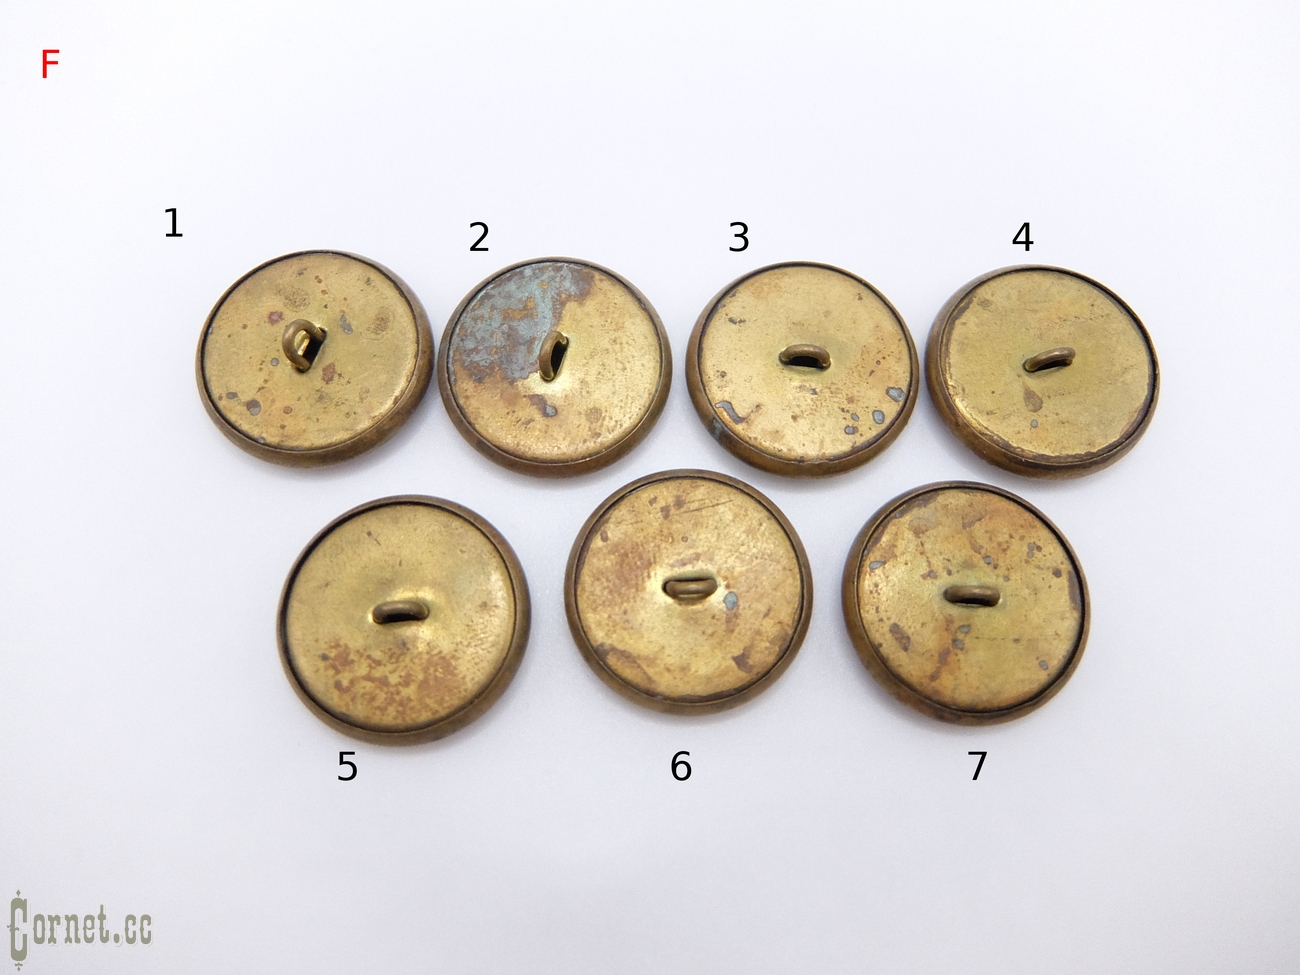 Russian Empire. Military uniforms buttons.